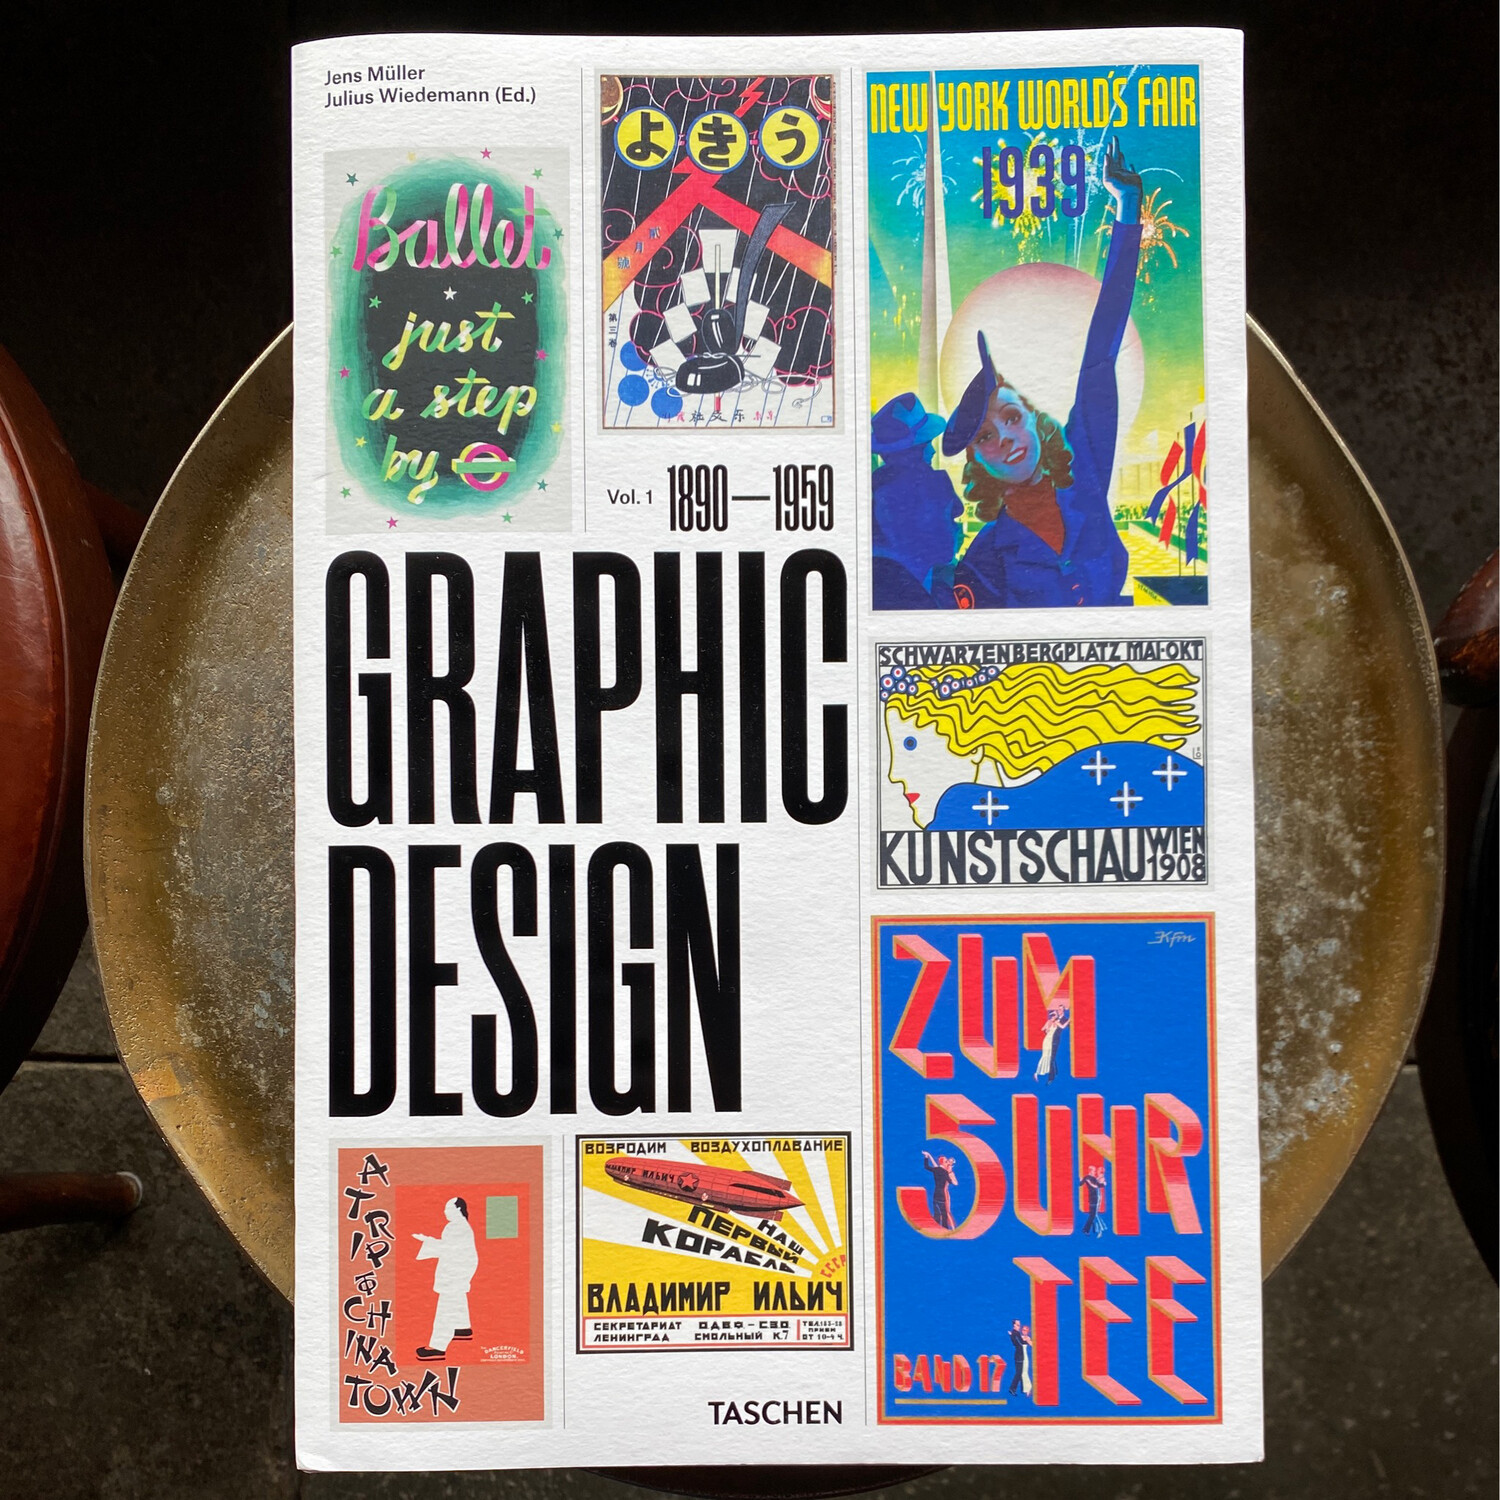 The History of Graphic Design. Vol. 1